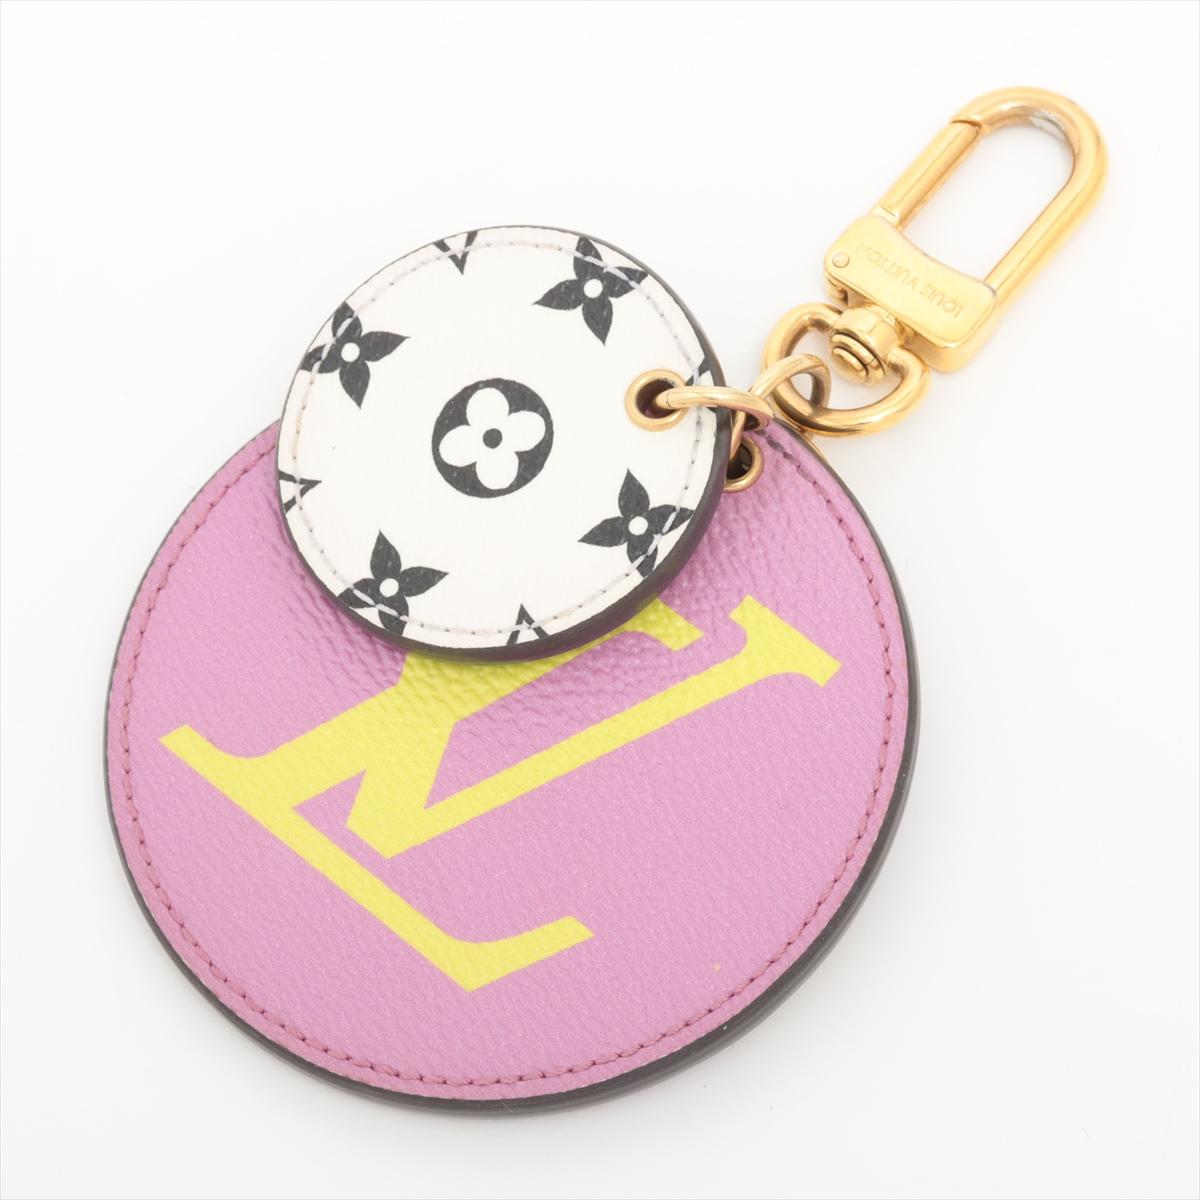 The Louis Vuitton Monogram LV Giant Initial Illustre Bag Charm in Lilac and Yellow features a dynamic and whimsical design with a playful blend of colors. The round-shaped charm showcases oversized LV initials in a vibrant combination of lilac and